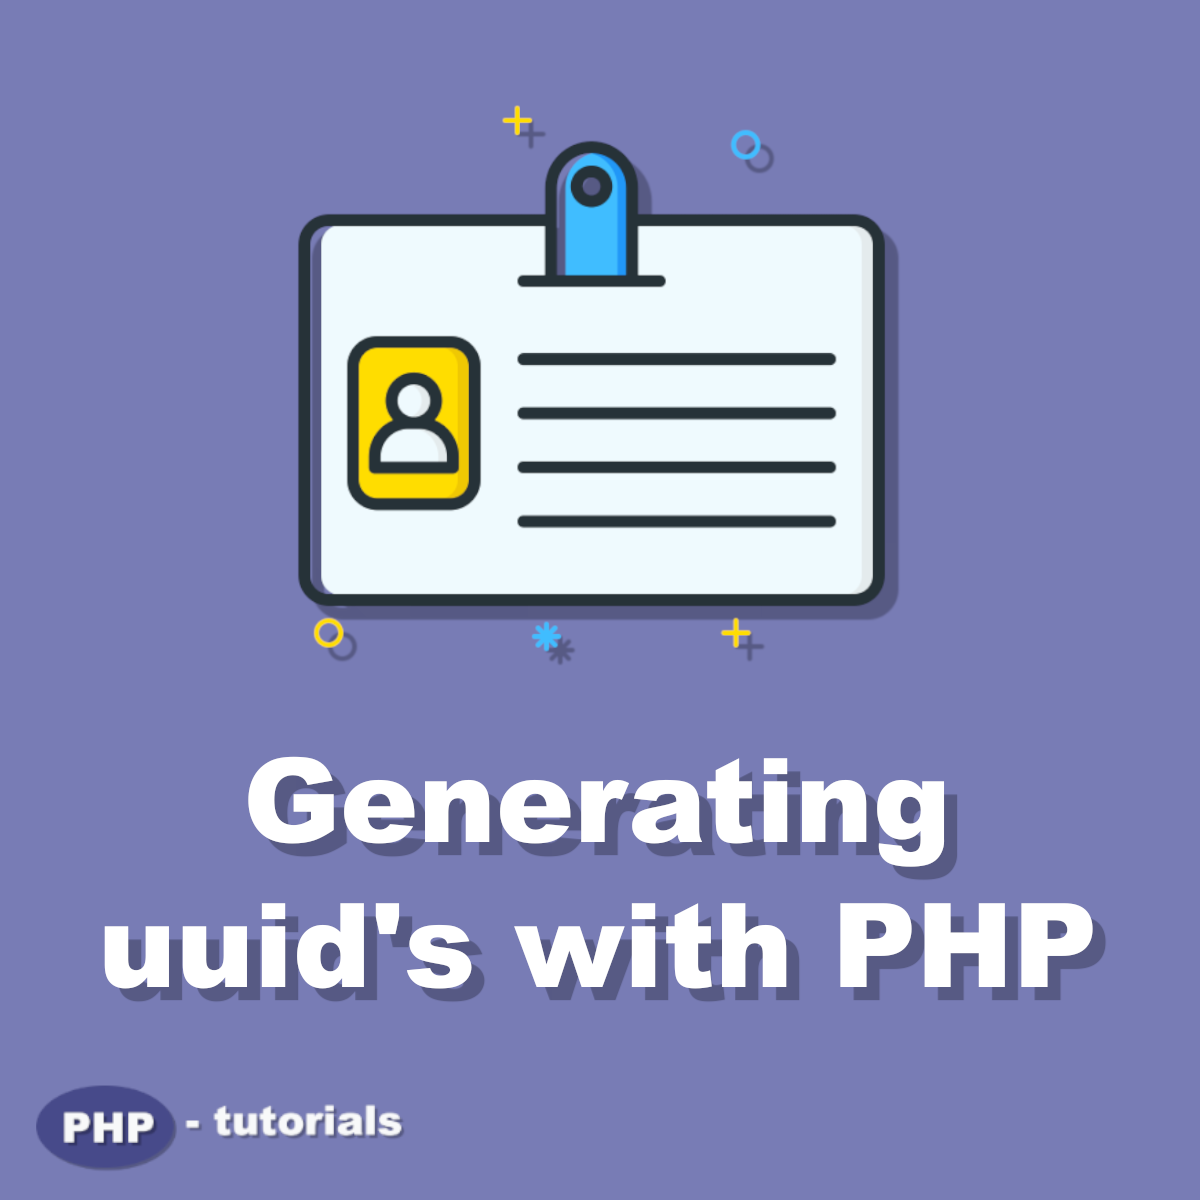 HowTo make PHP generate uuids tutorial post image